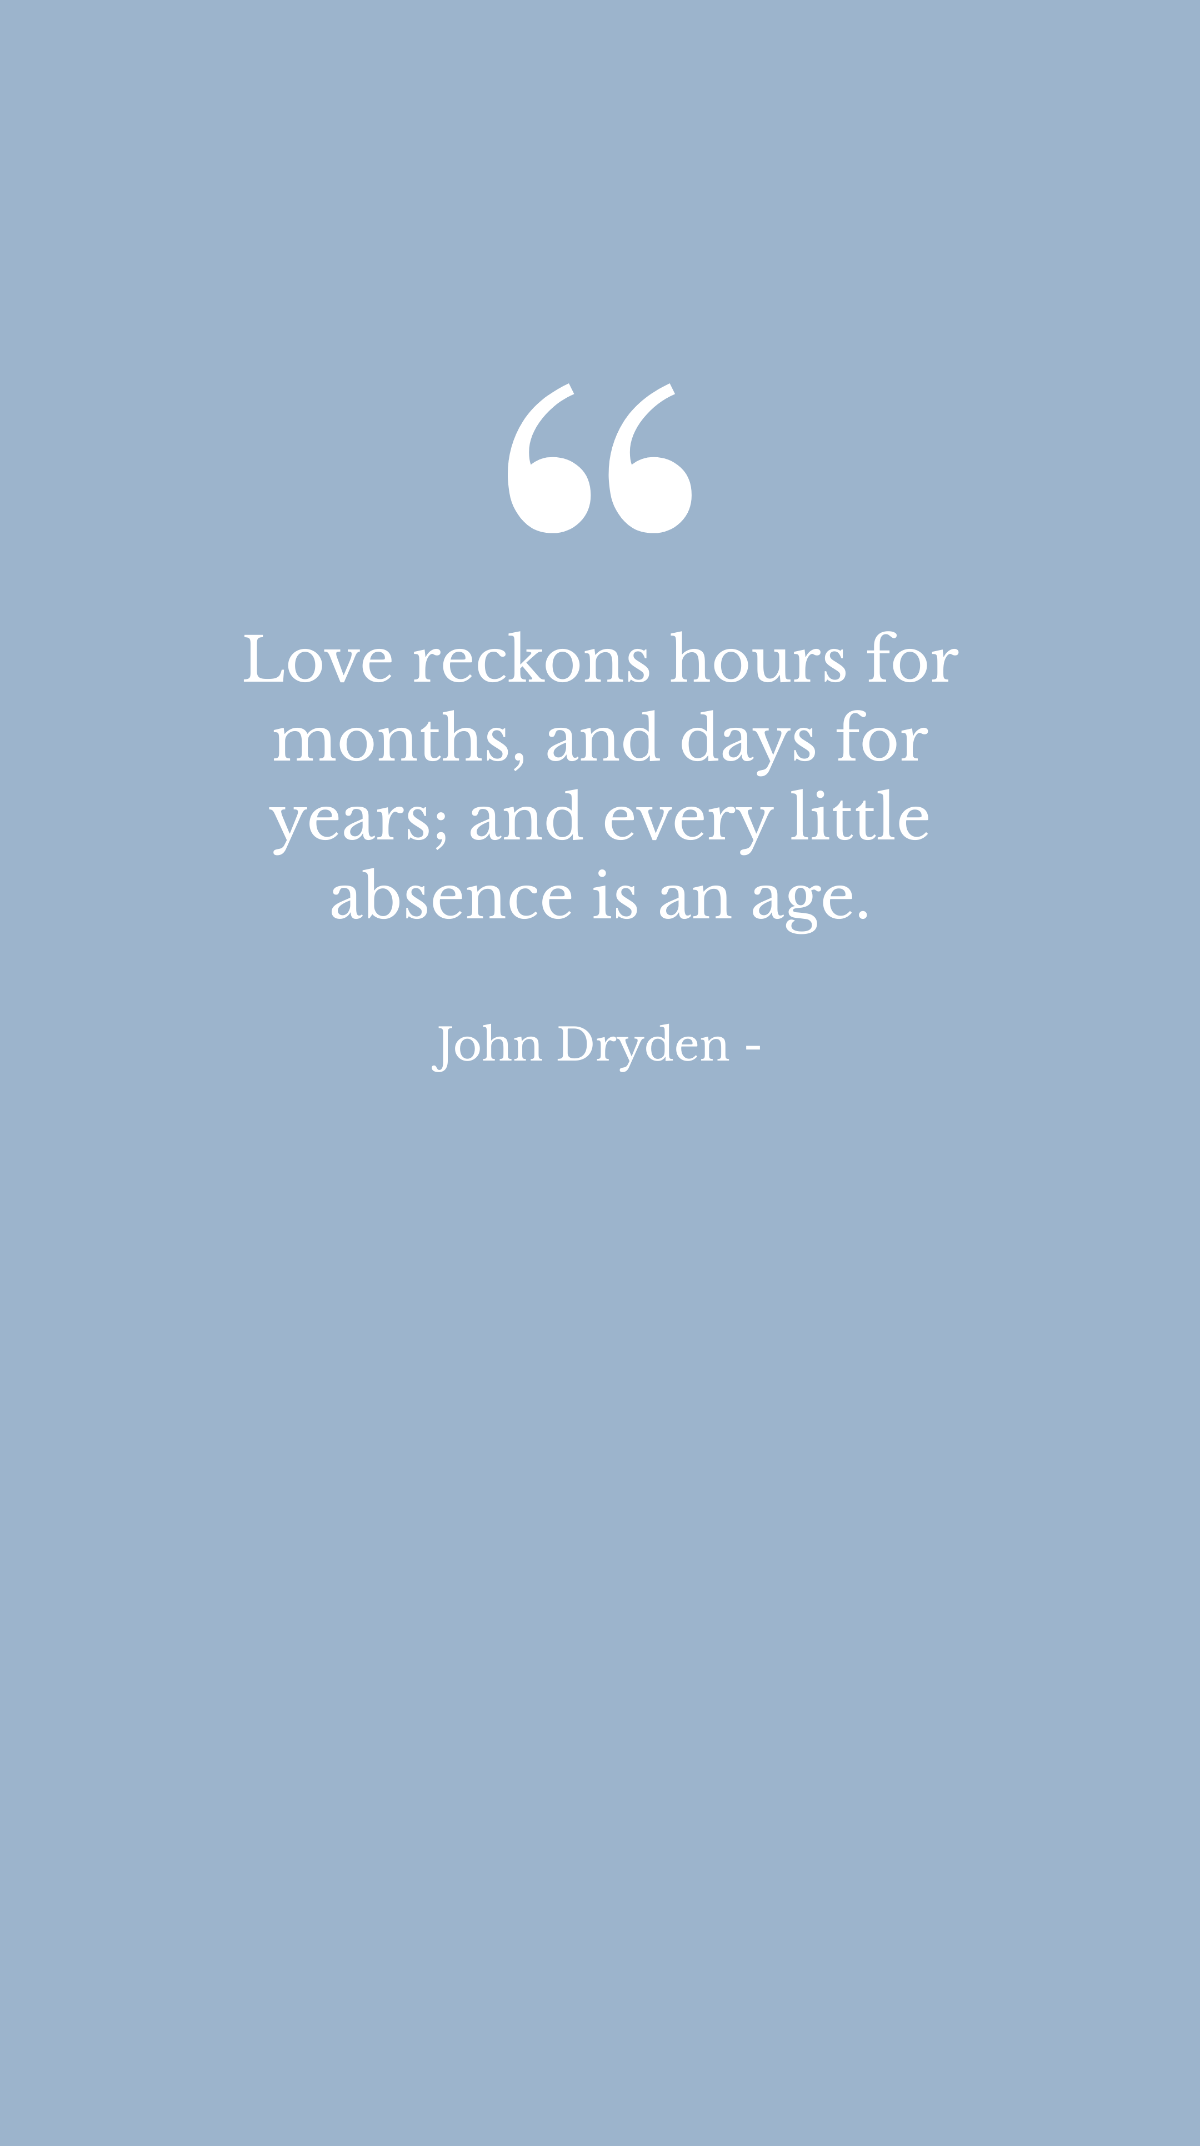 John Dryden - Love reckons hours for months, and days for years; and every little absence is an age.